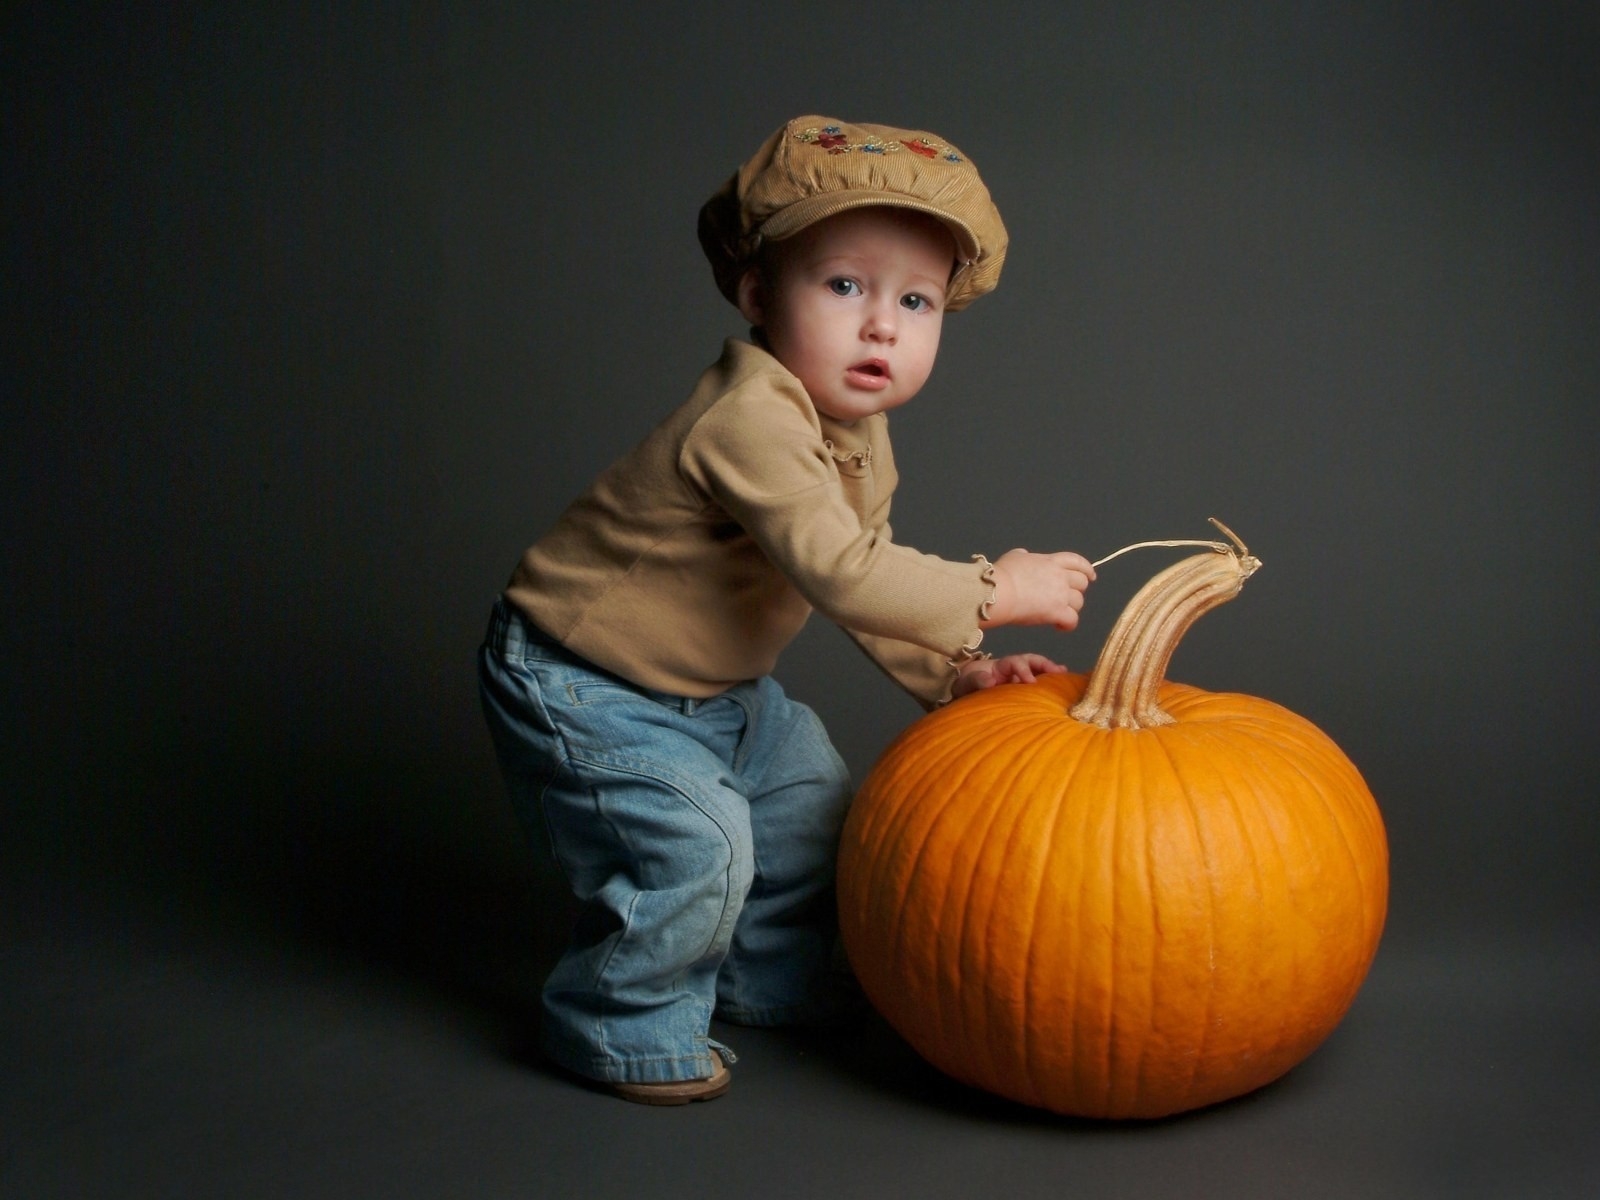 The Boy with Pumpkin for 1600 x 1200 resolution